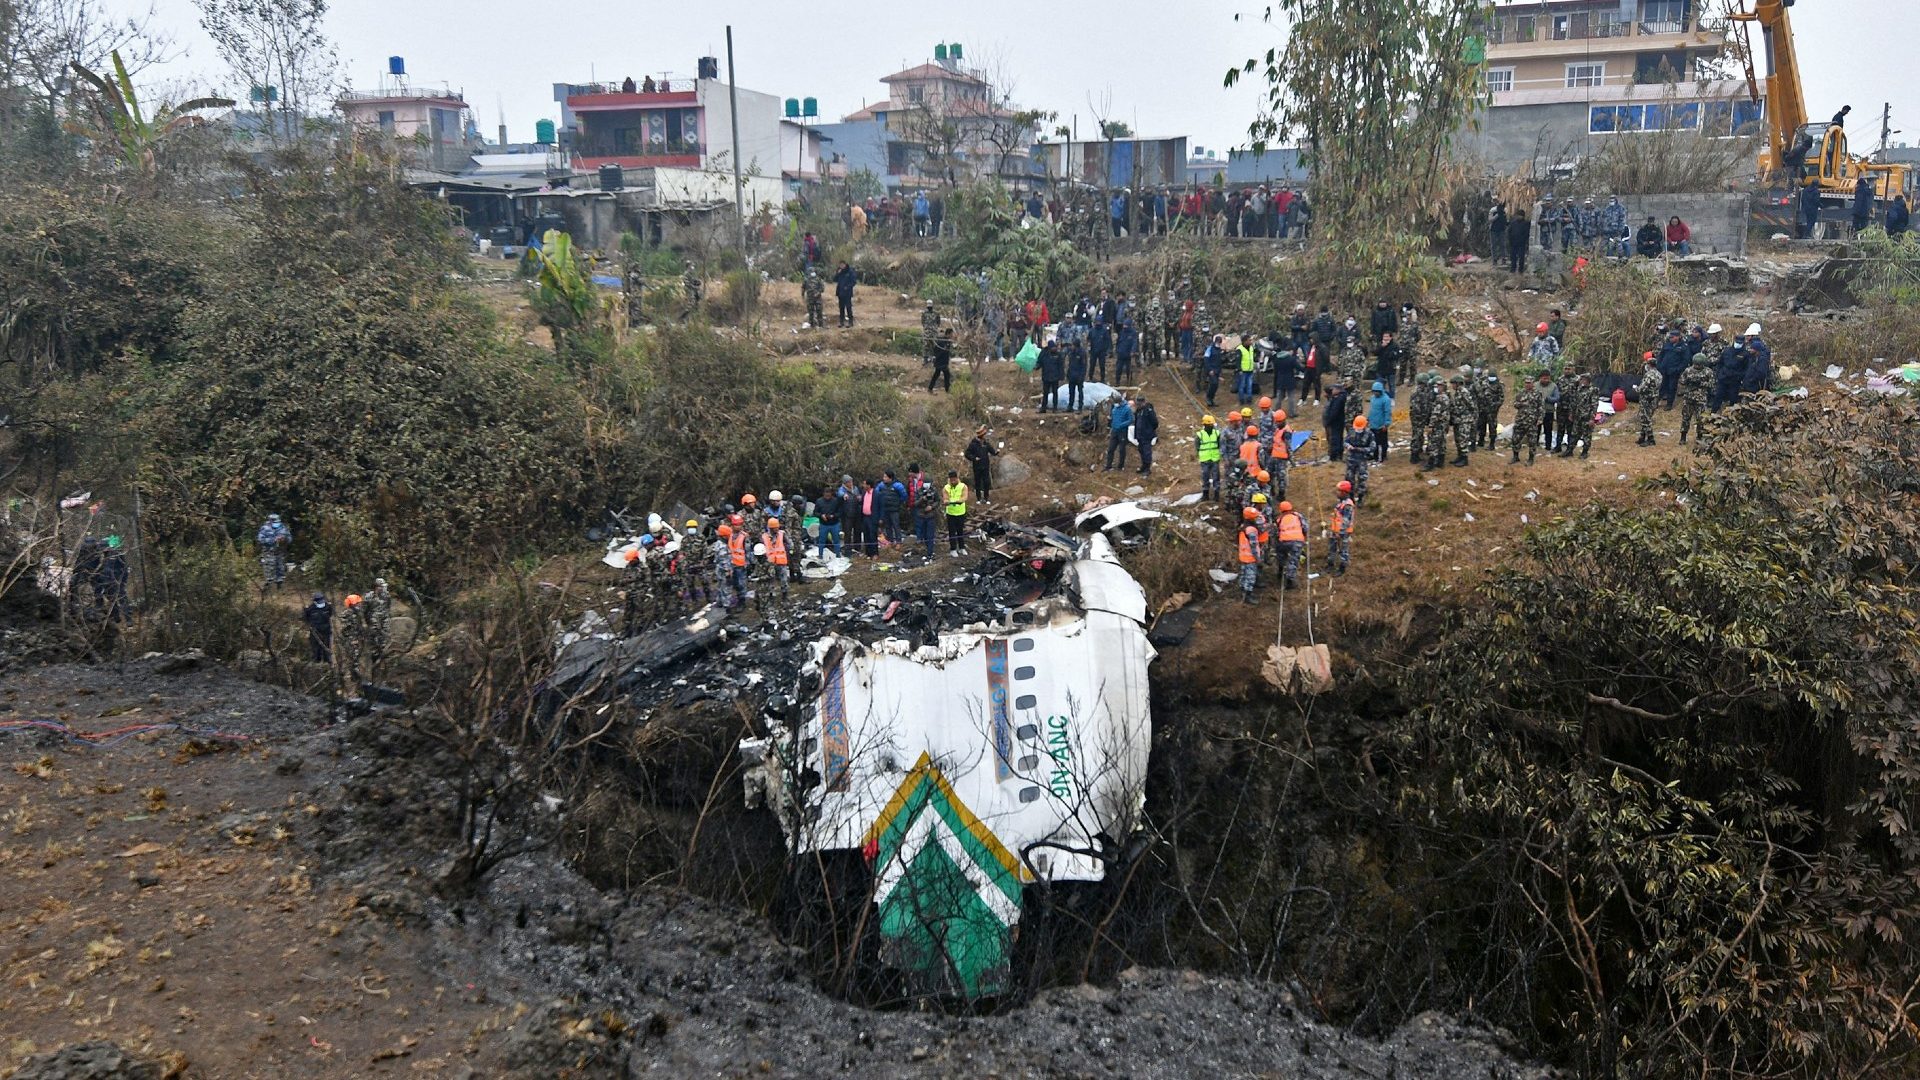 Rescuers Inspect The Remains At The Crash Site Of A Yeti Airlines Plane In Pokhara, Nepal, Sunday, Monday, Jan. 16.  (Prakash Mathema/Afp Via Getty Images)